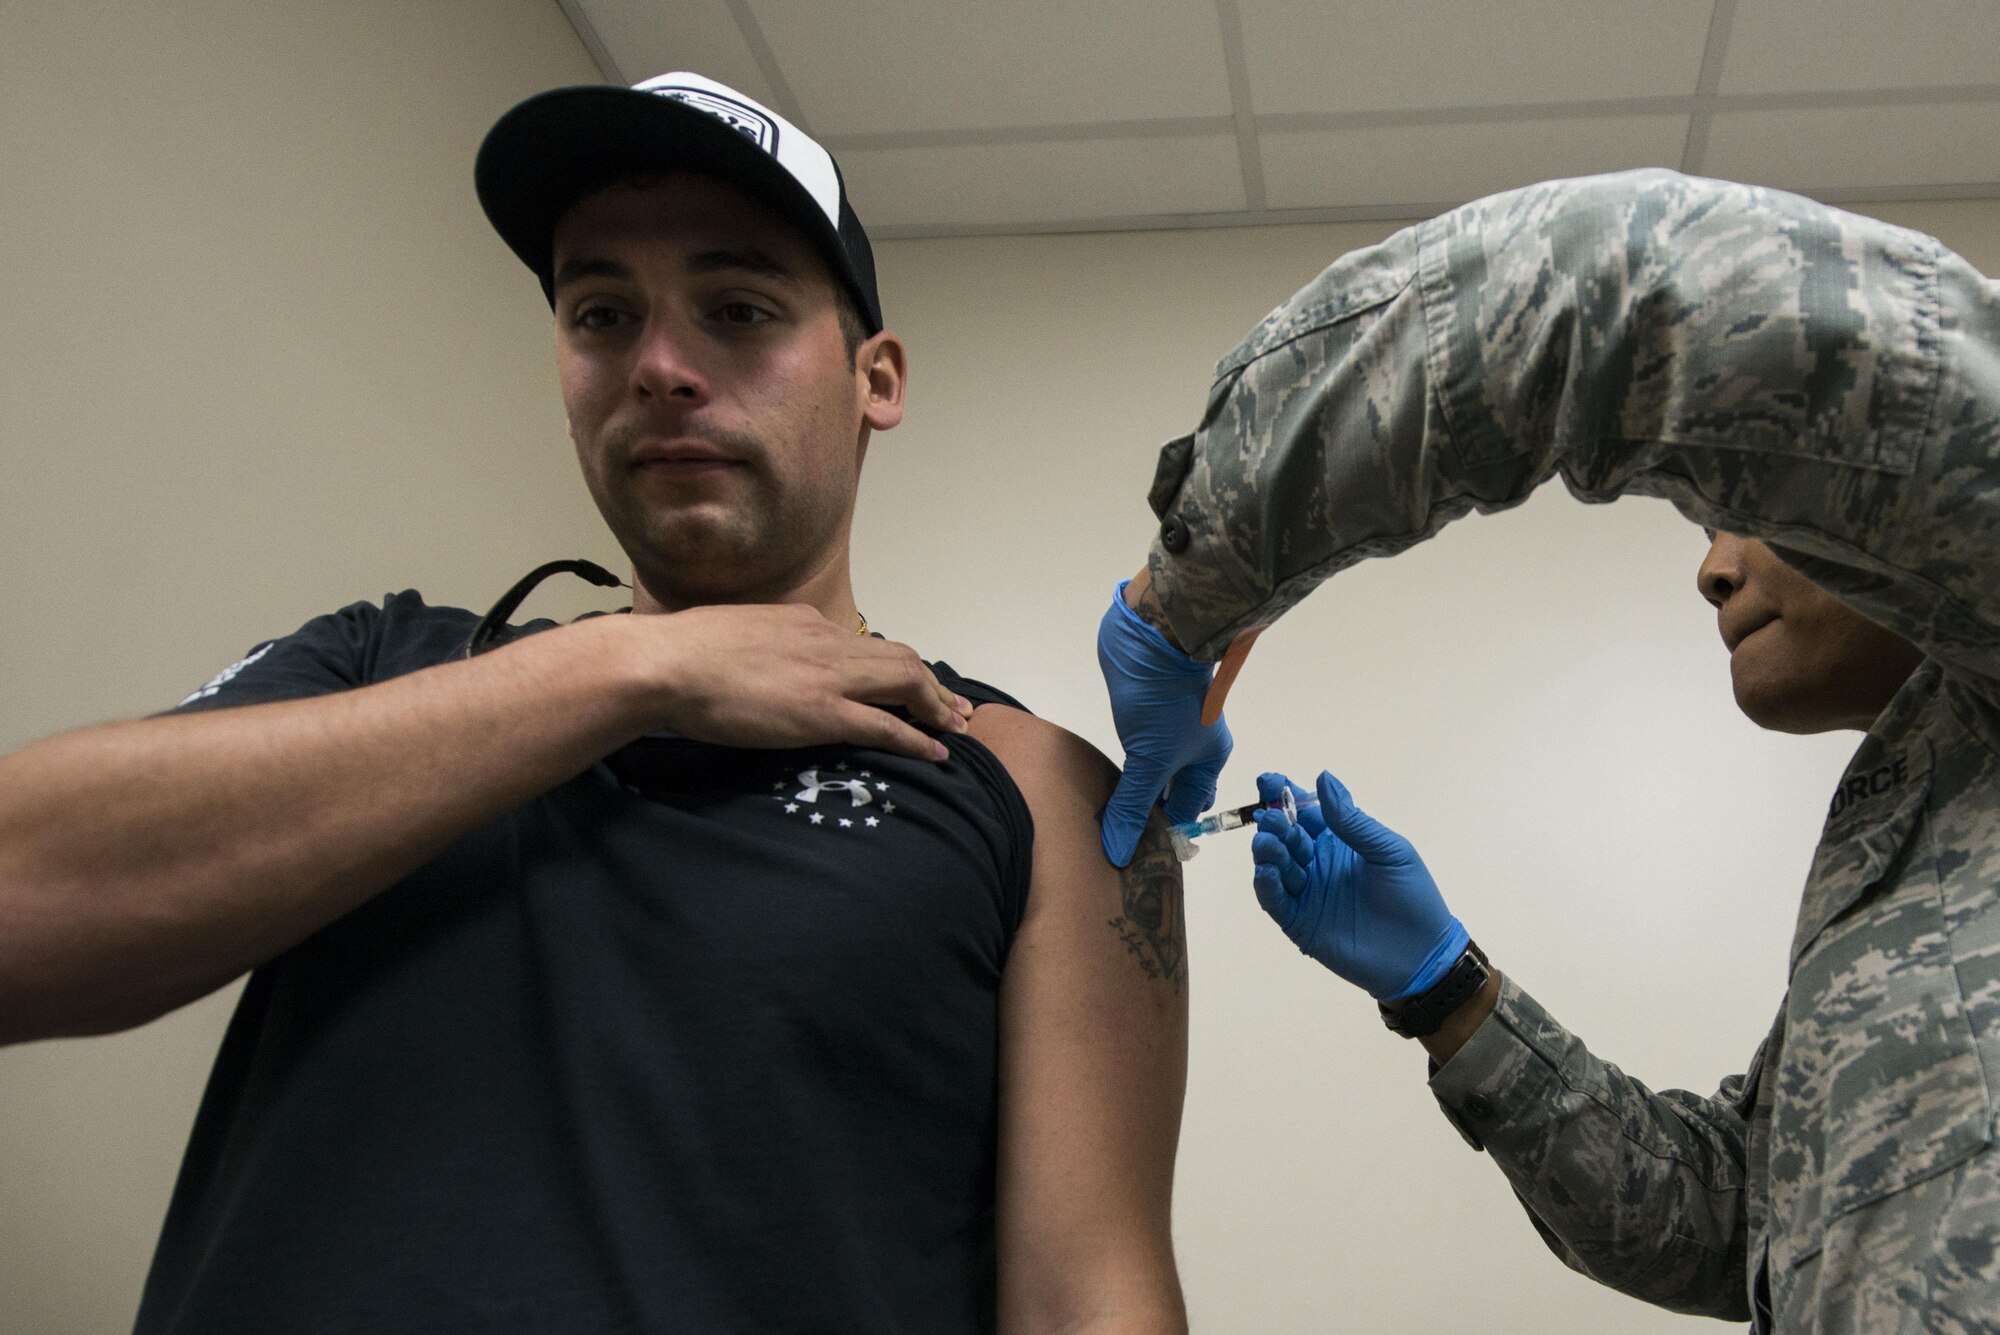 U.S. Air Force Staff Sgt. Jordan Herrick, 20th Civil Engineer Squadron firefighter, receives a vaccine from Senior Airman Tamika Bradley, 20th Medical Operations Squadron allergy and immunizations technician, at Shaw Air Force Base, South Carolina, Oct. 23, 2017.